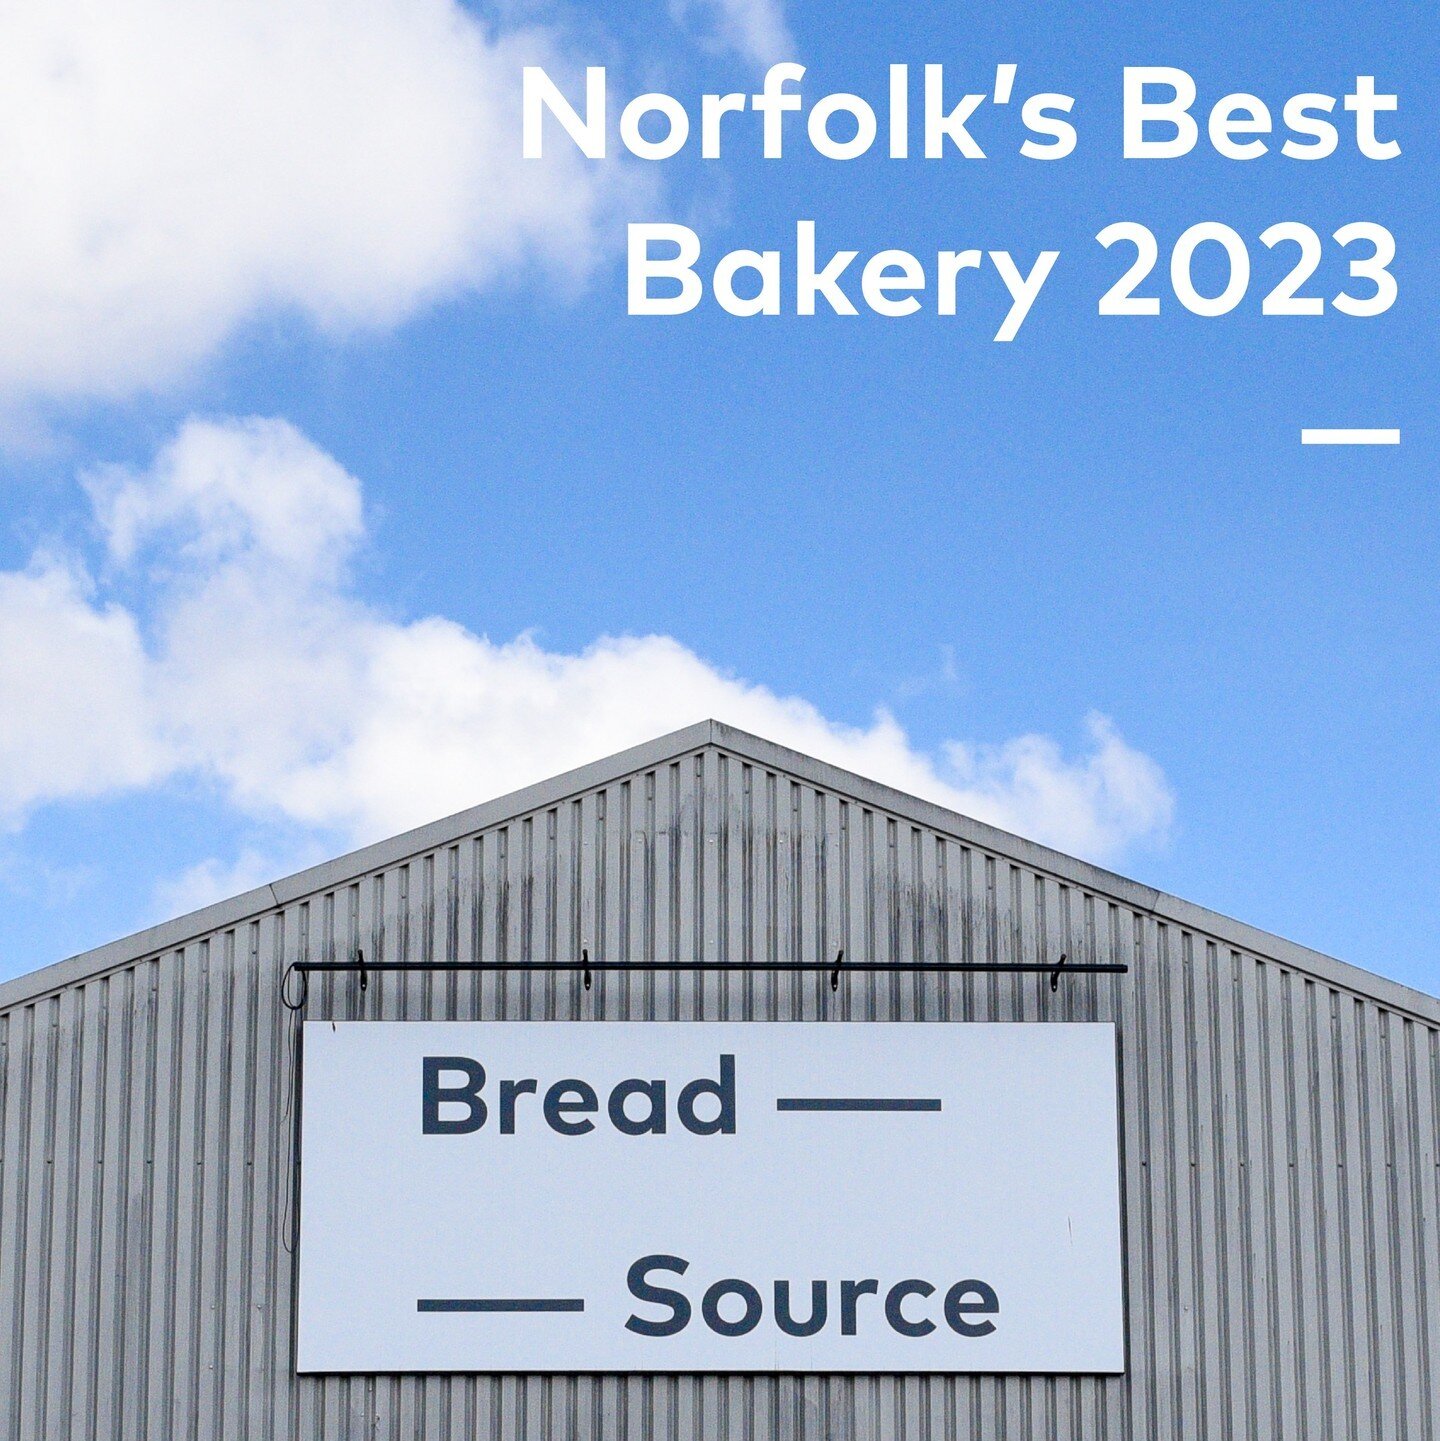 🏆🍞🥐🎊 ⁠
⁠
Last week we got the news that Bread Source had been awarded the accolade of Norfolk's Best Bakery, and as you might expect we could not be more proud of everyone. ⁠
⁠
Each and every member of our team from bakers to baristas, and everyt